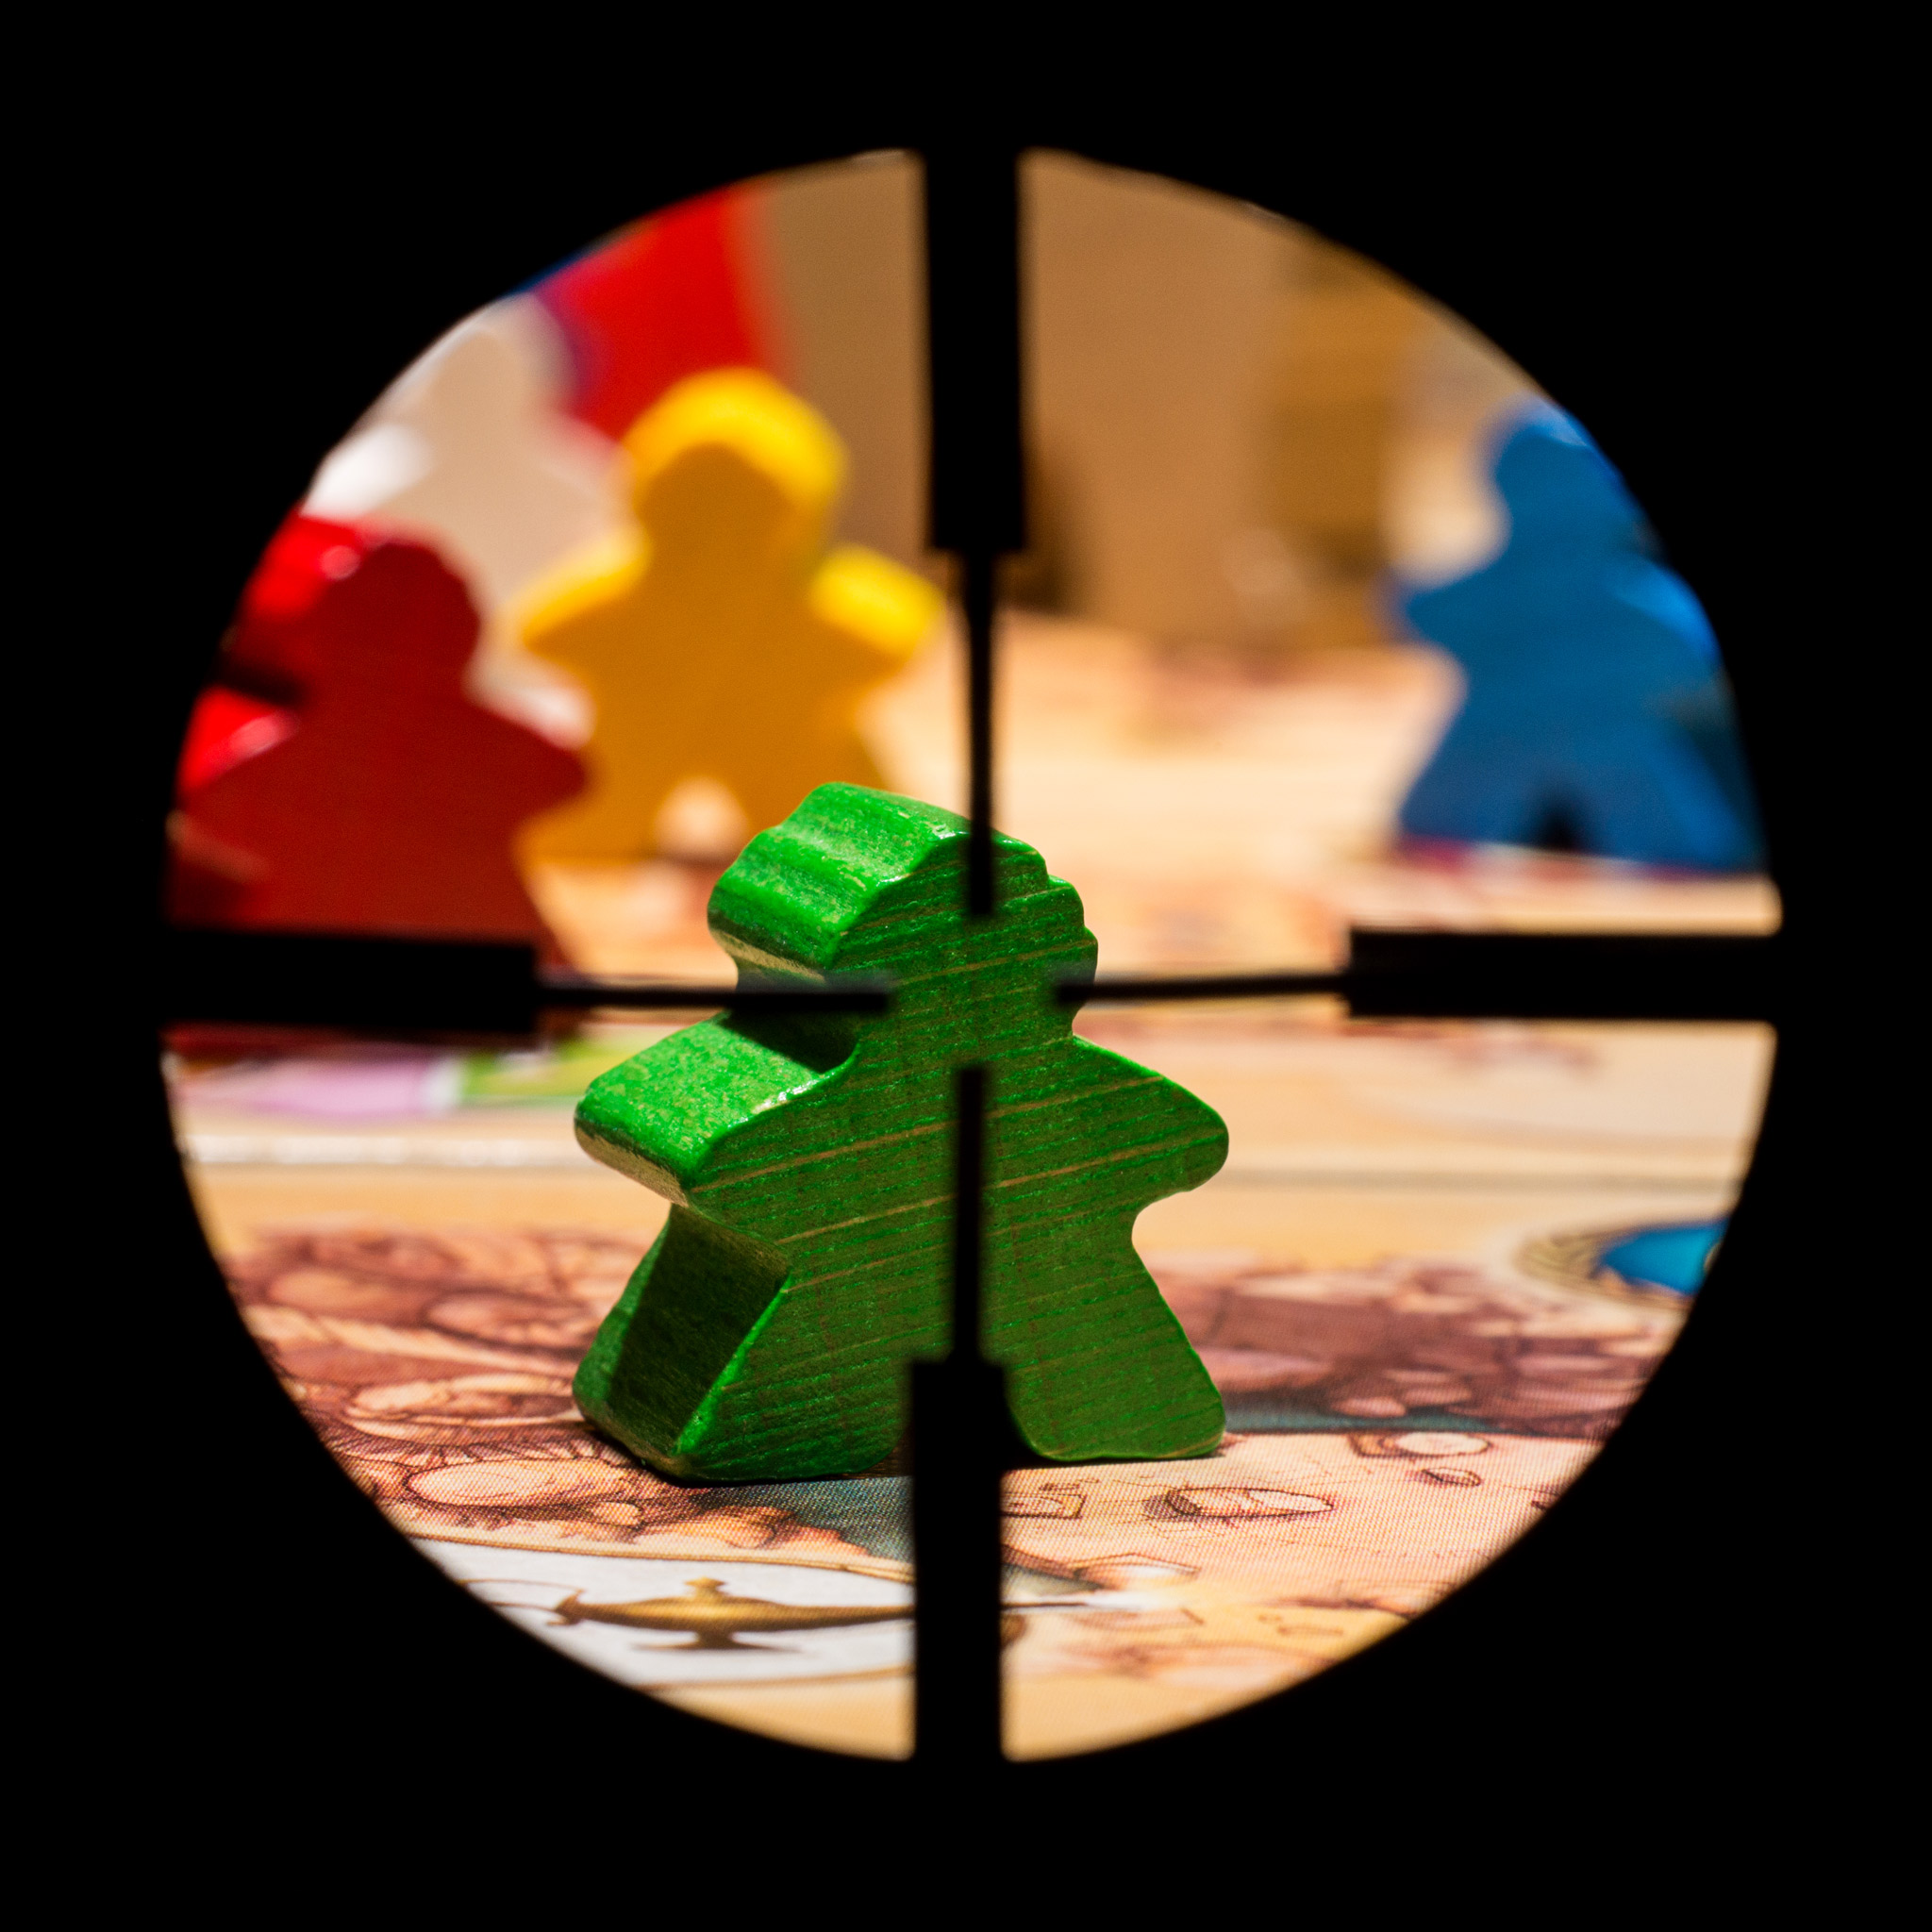 View through the crosshairs in Five Tribes tabletop board game